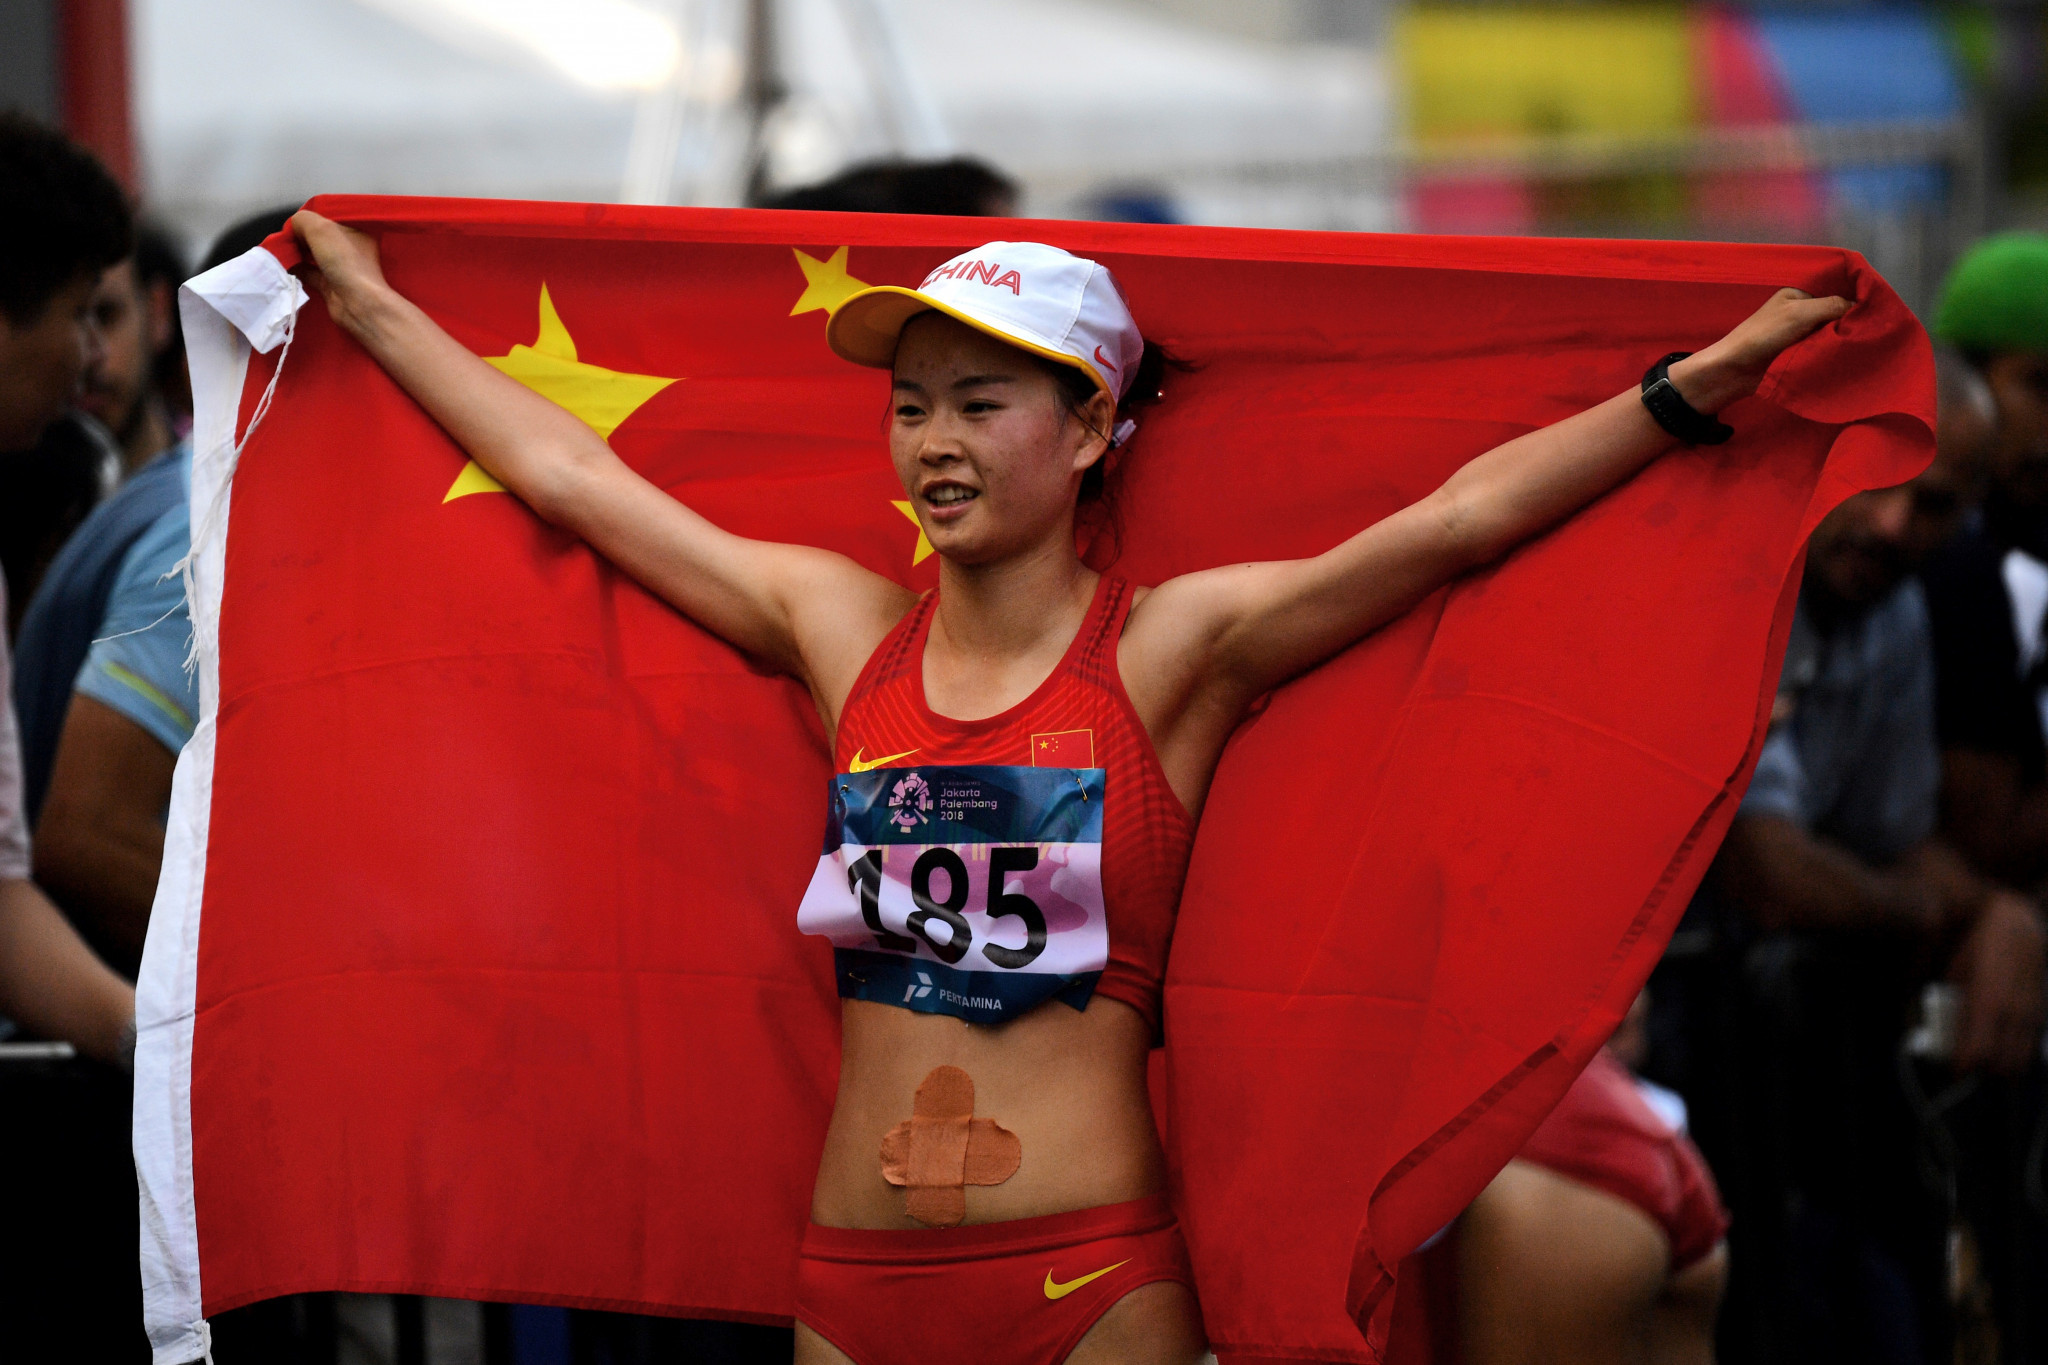 Yang takes 49 seconds off women's 20km race walk world record at China's National Championships